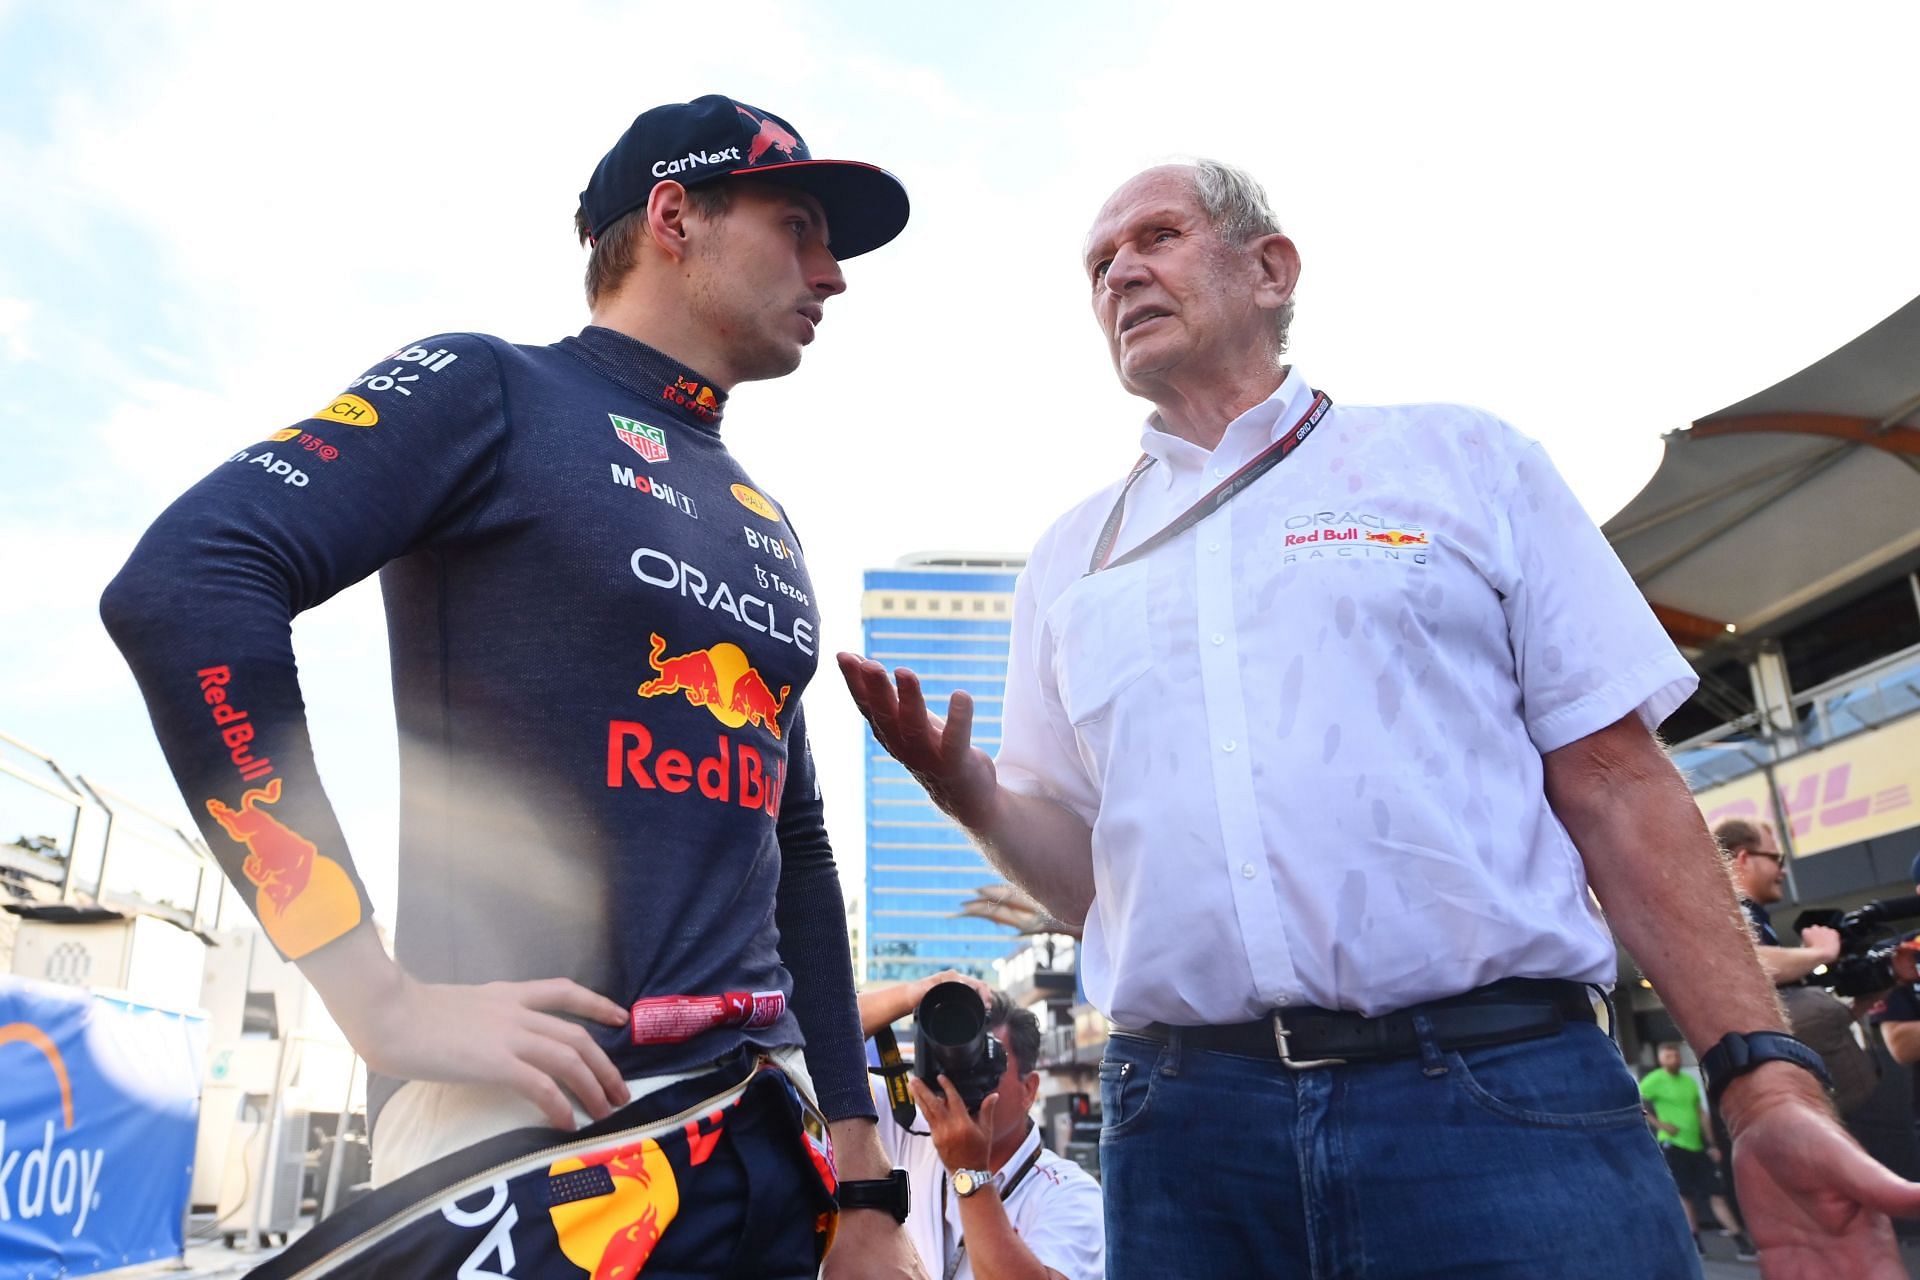 Red Bull driver Max Verstappen and team advisor Dr. Helmut Marko share a moment during the 2022 F1 Azerbaijan GP. (Photo by Dan Mullan/Getty Images)